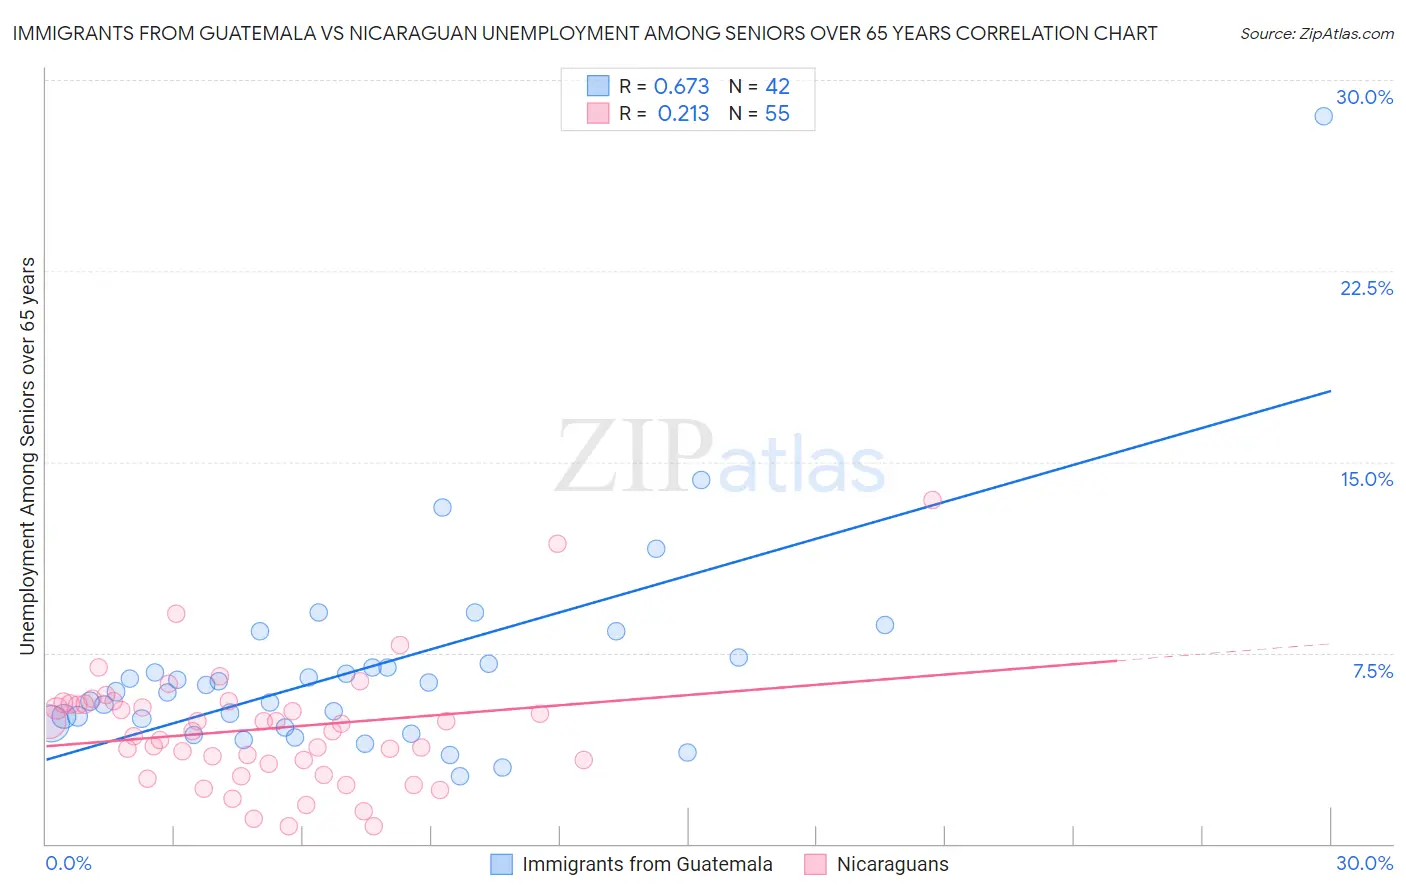 Immigrants from Guatemala vs Nicaraguan Unemployment Among Seniors over 65 years